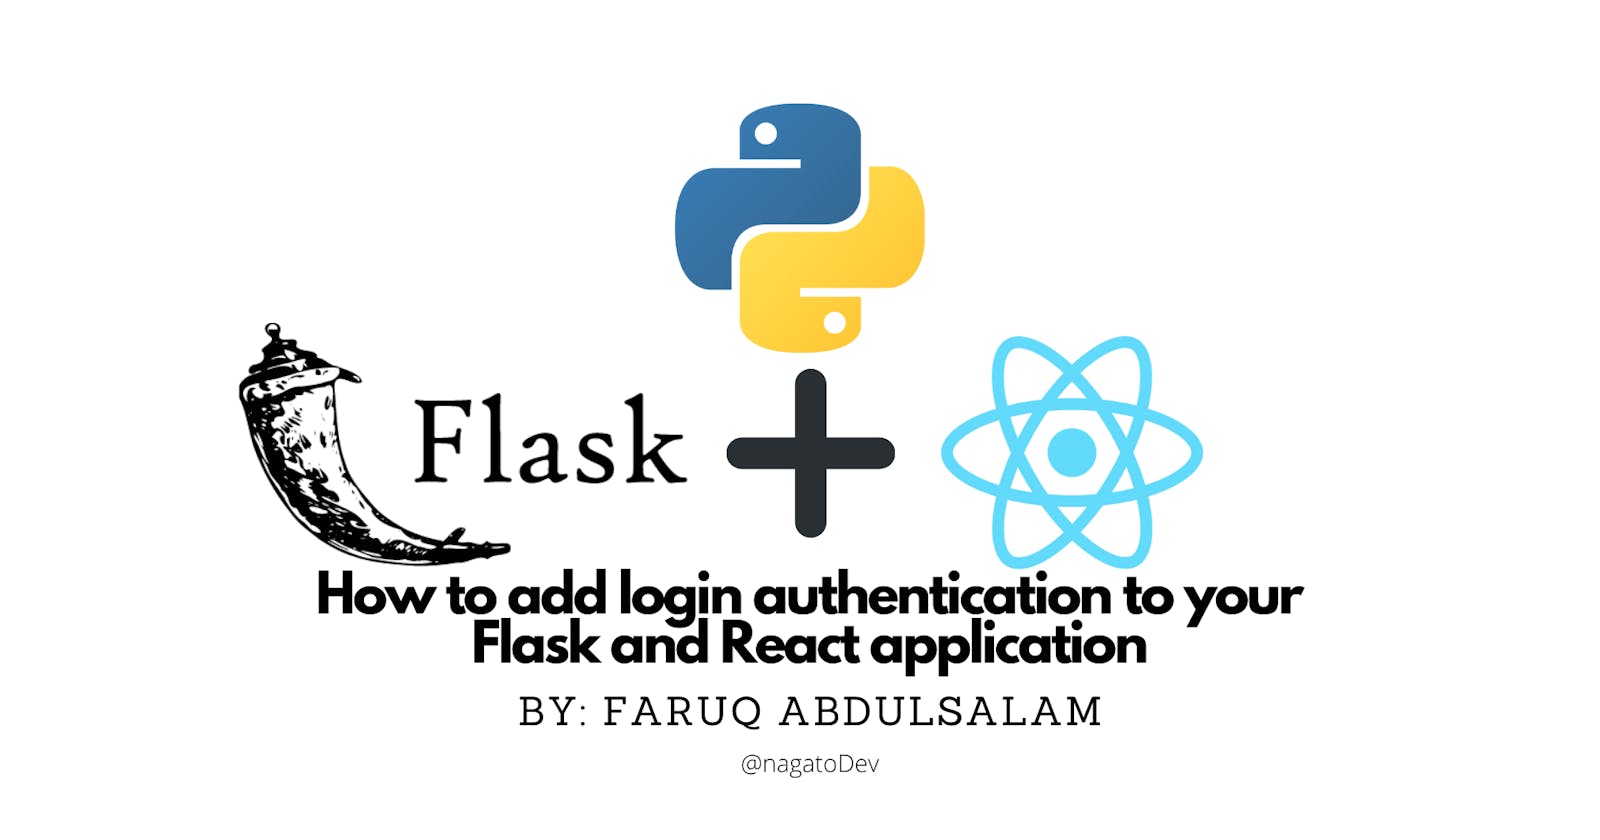 How to add login authentication to your Flask and React application.